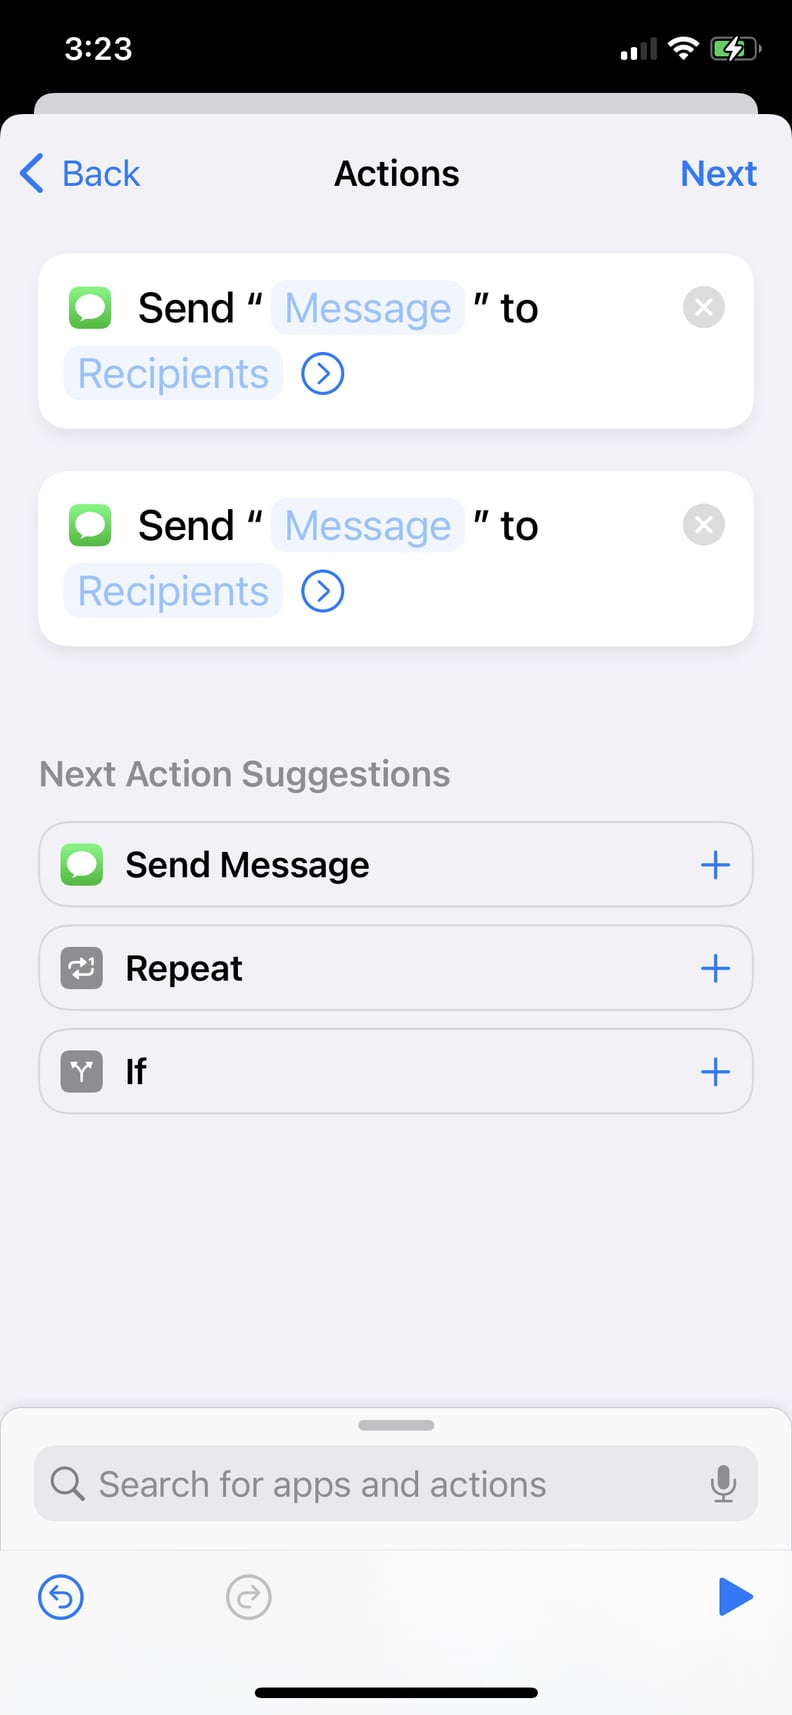 To Schedule More Than 1 Text, Go Back to Step 7 and Repeat the Process